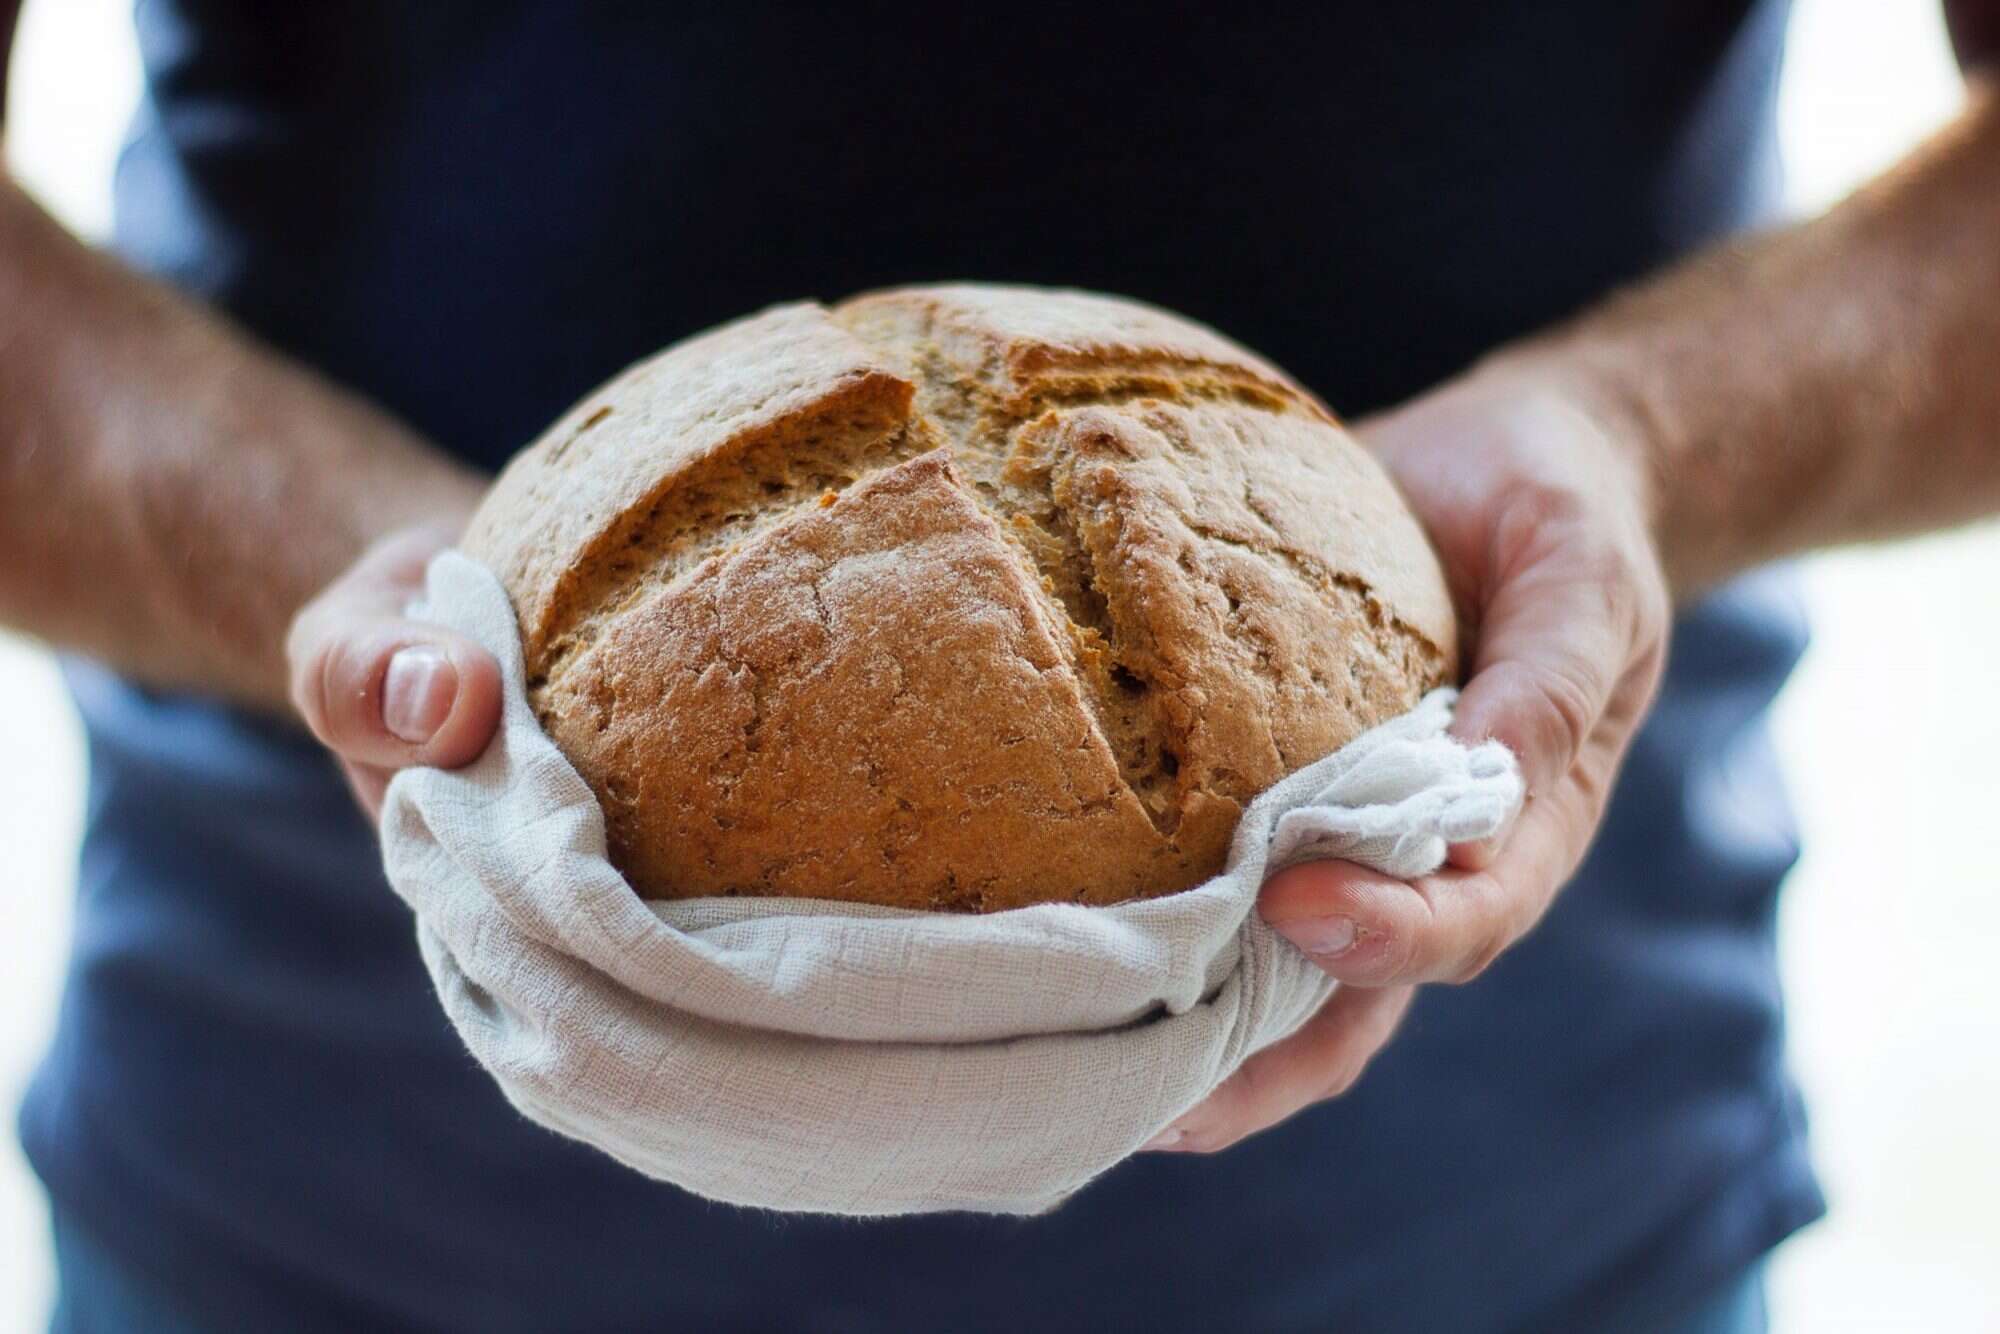 How Baking Therapy Can Improve Your Mental & Physical Health